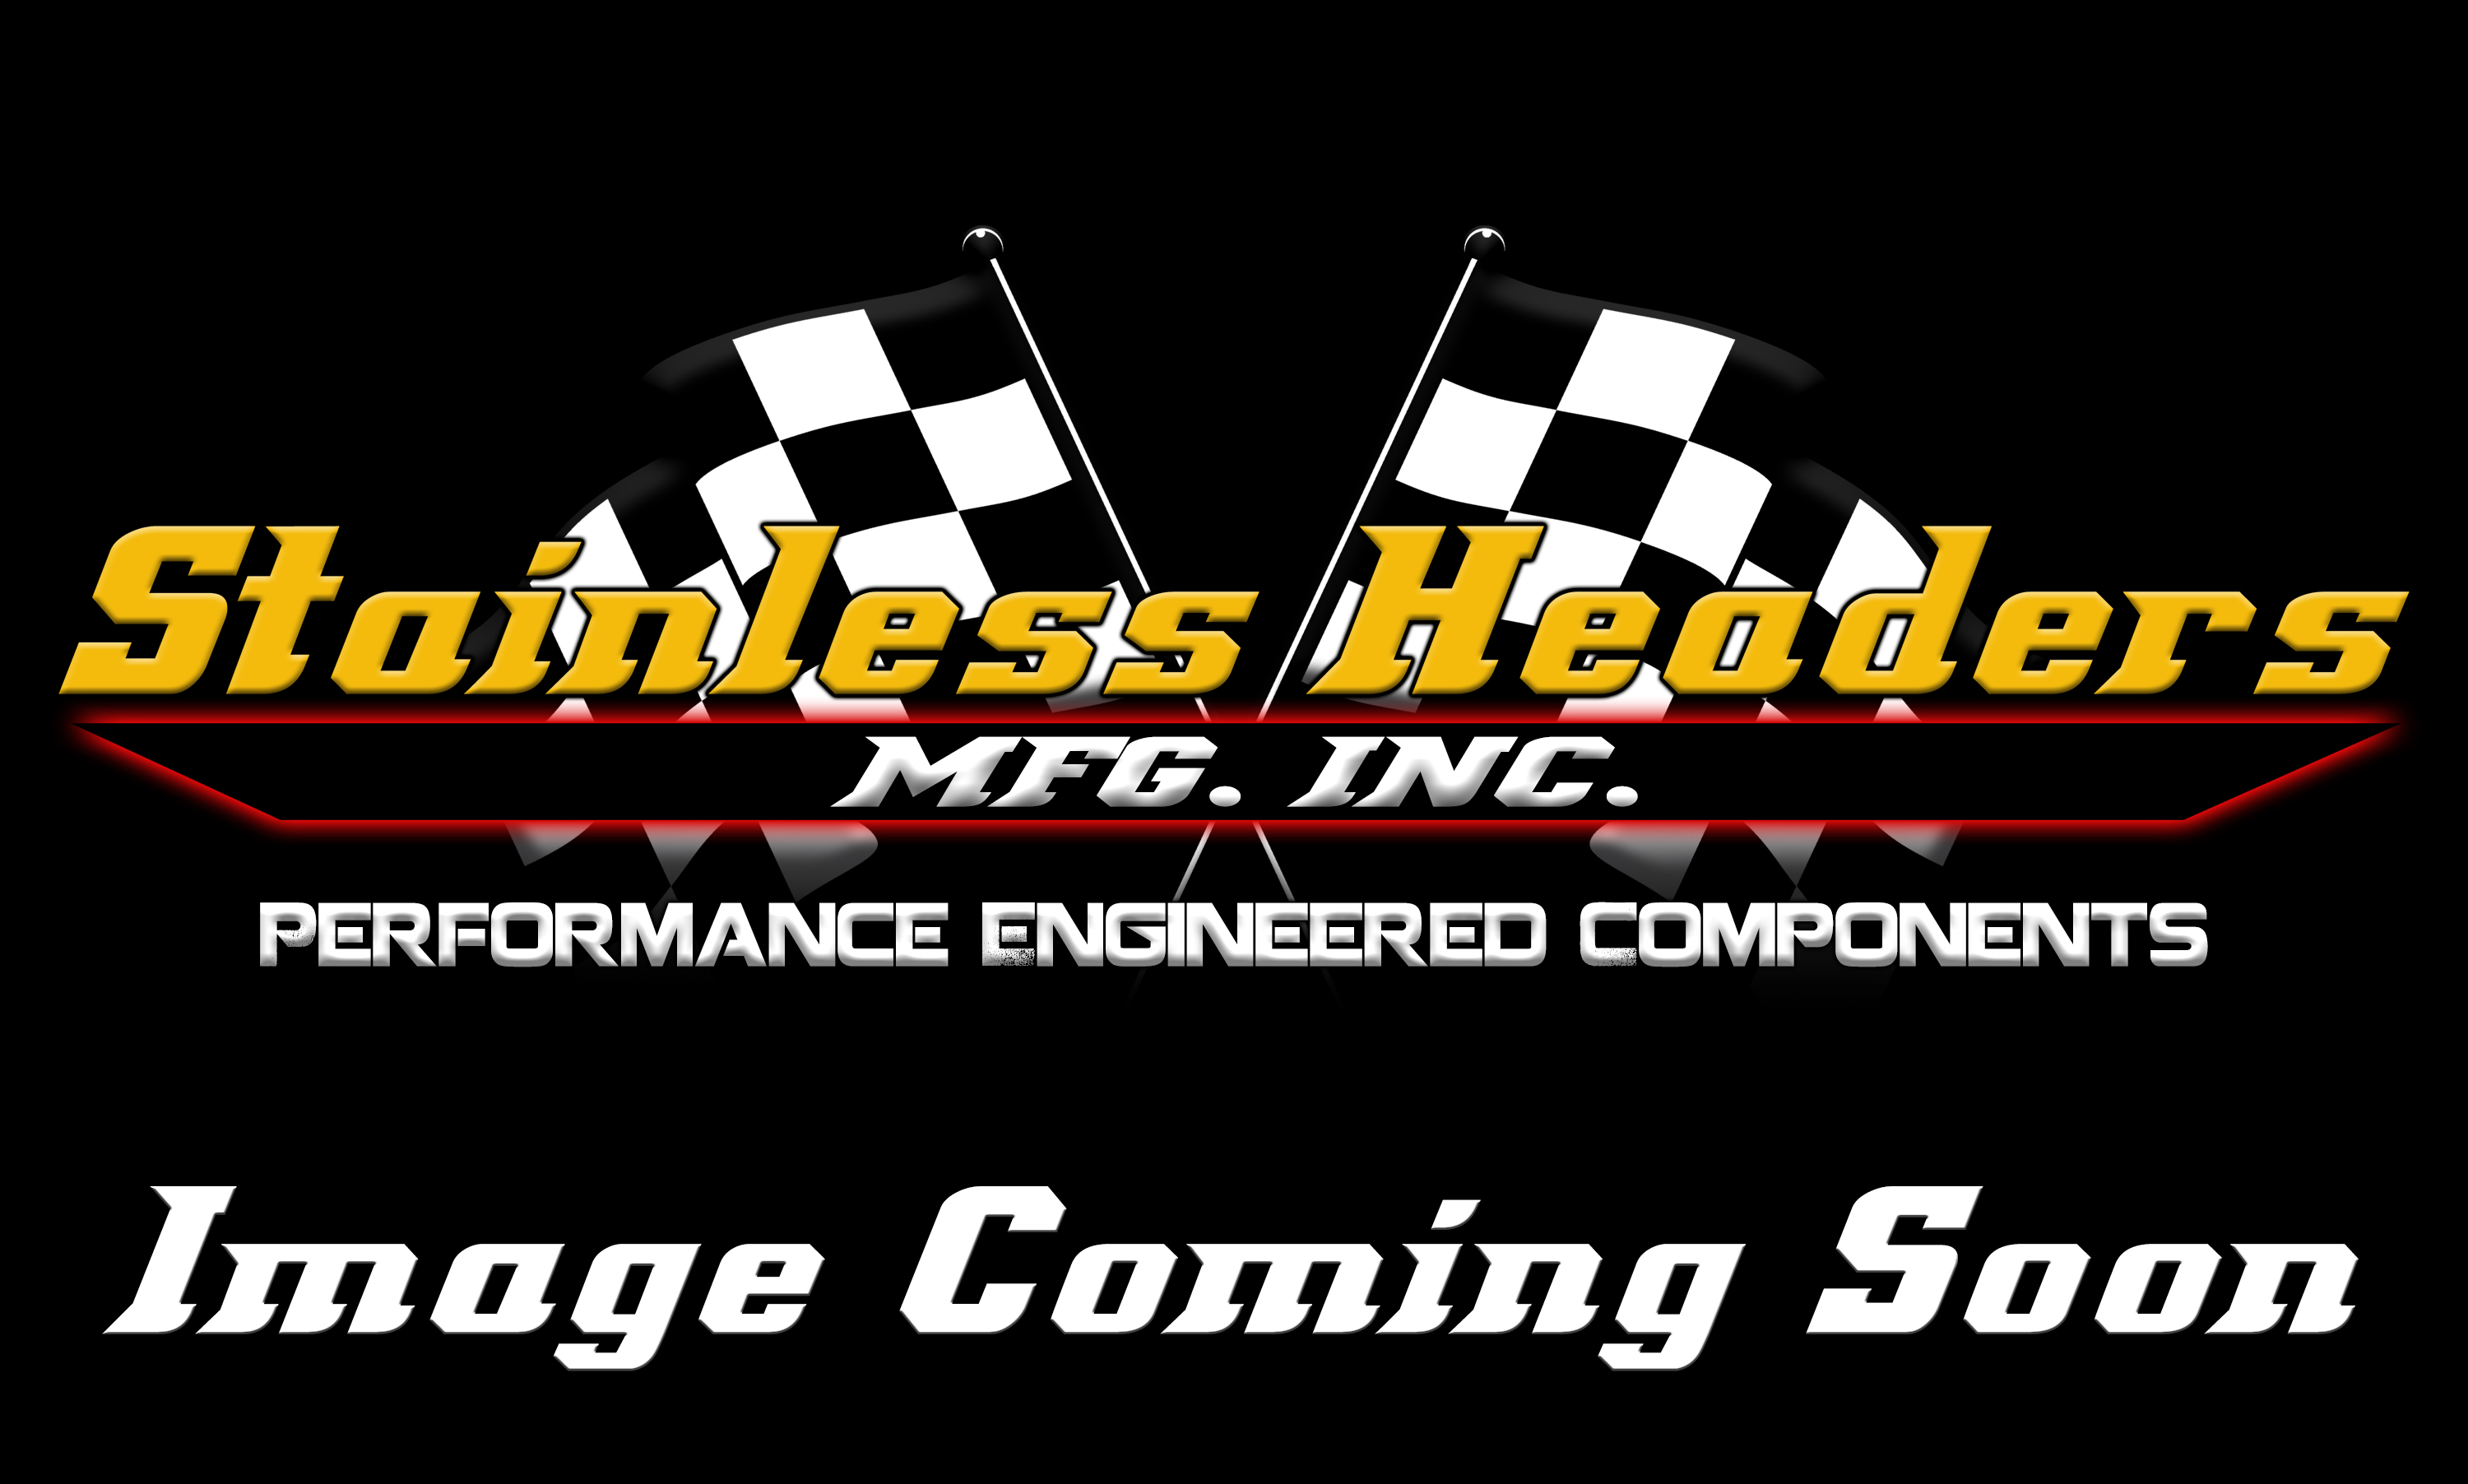 Stainless Headers - 1 1/2" Primary 2 into 1 Performance Merge Collector-16ga Mild Steel